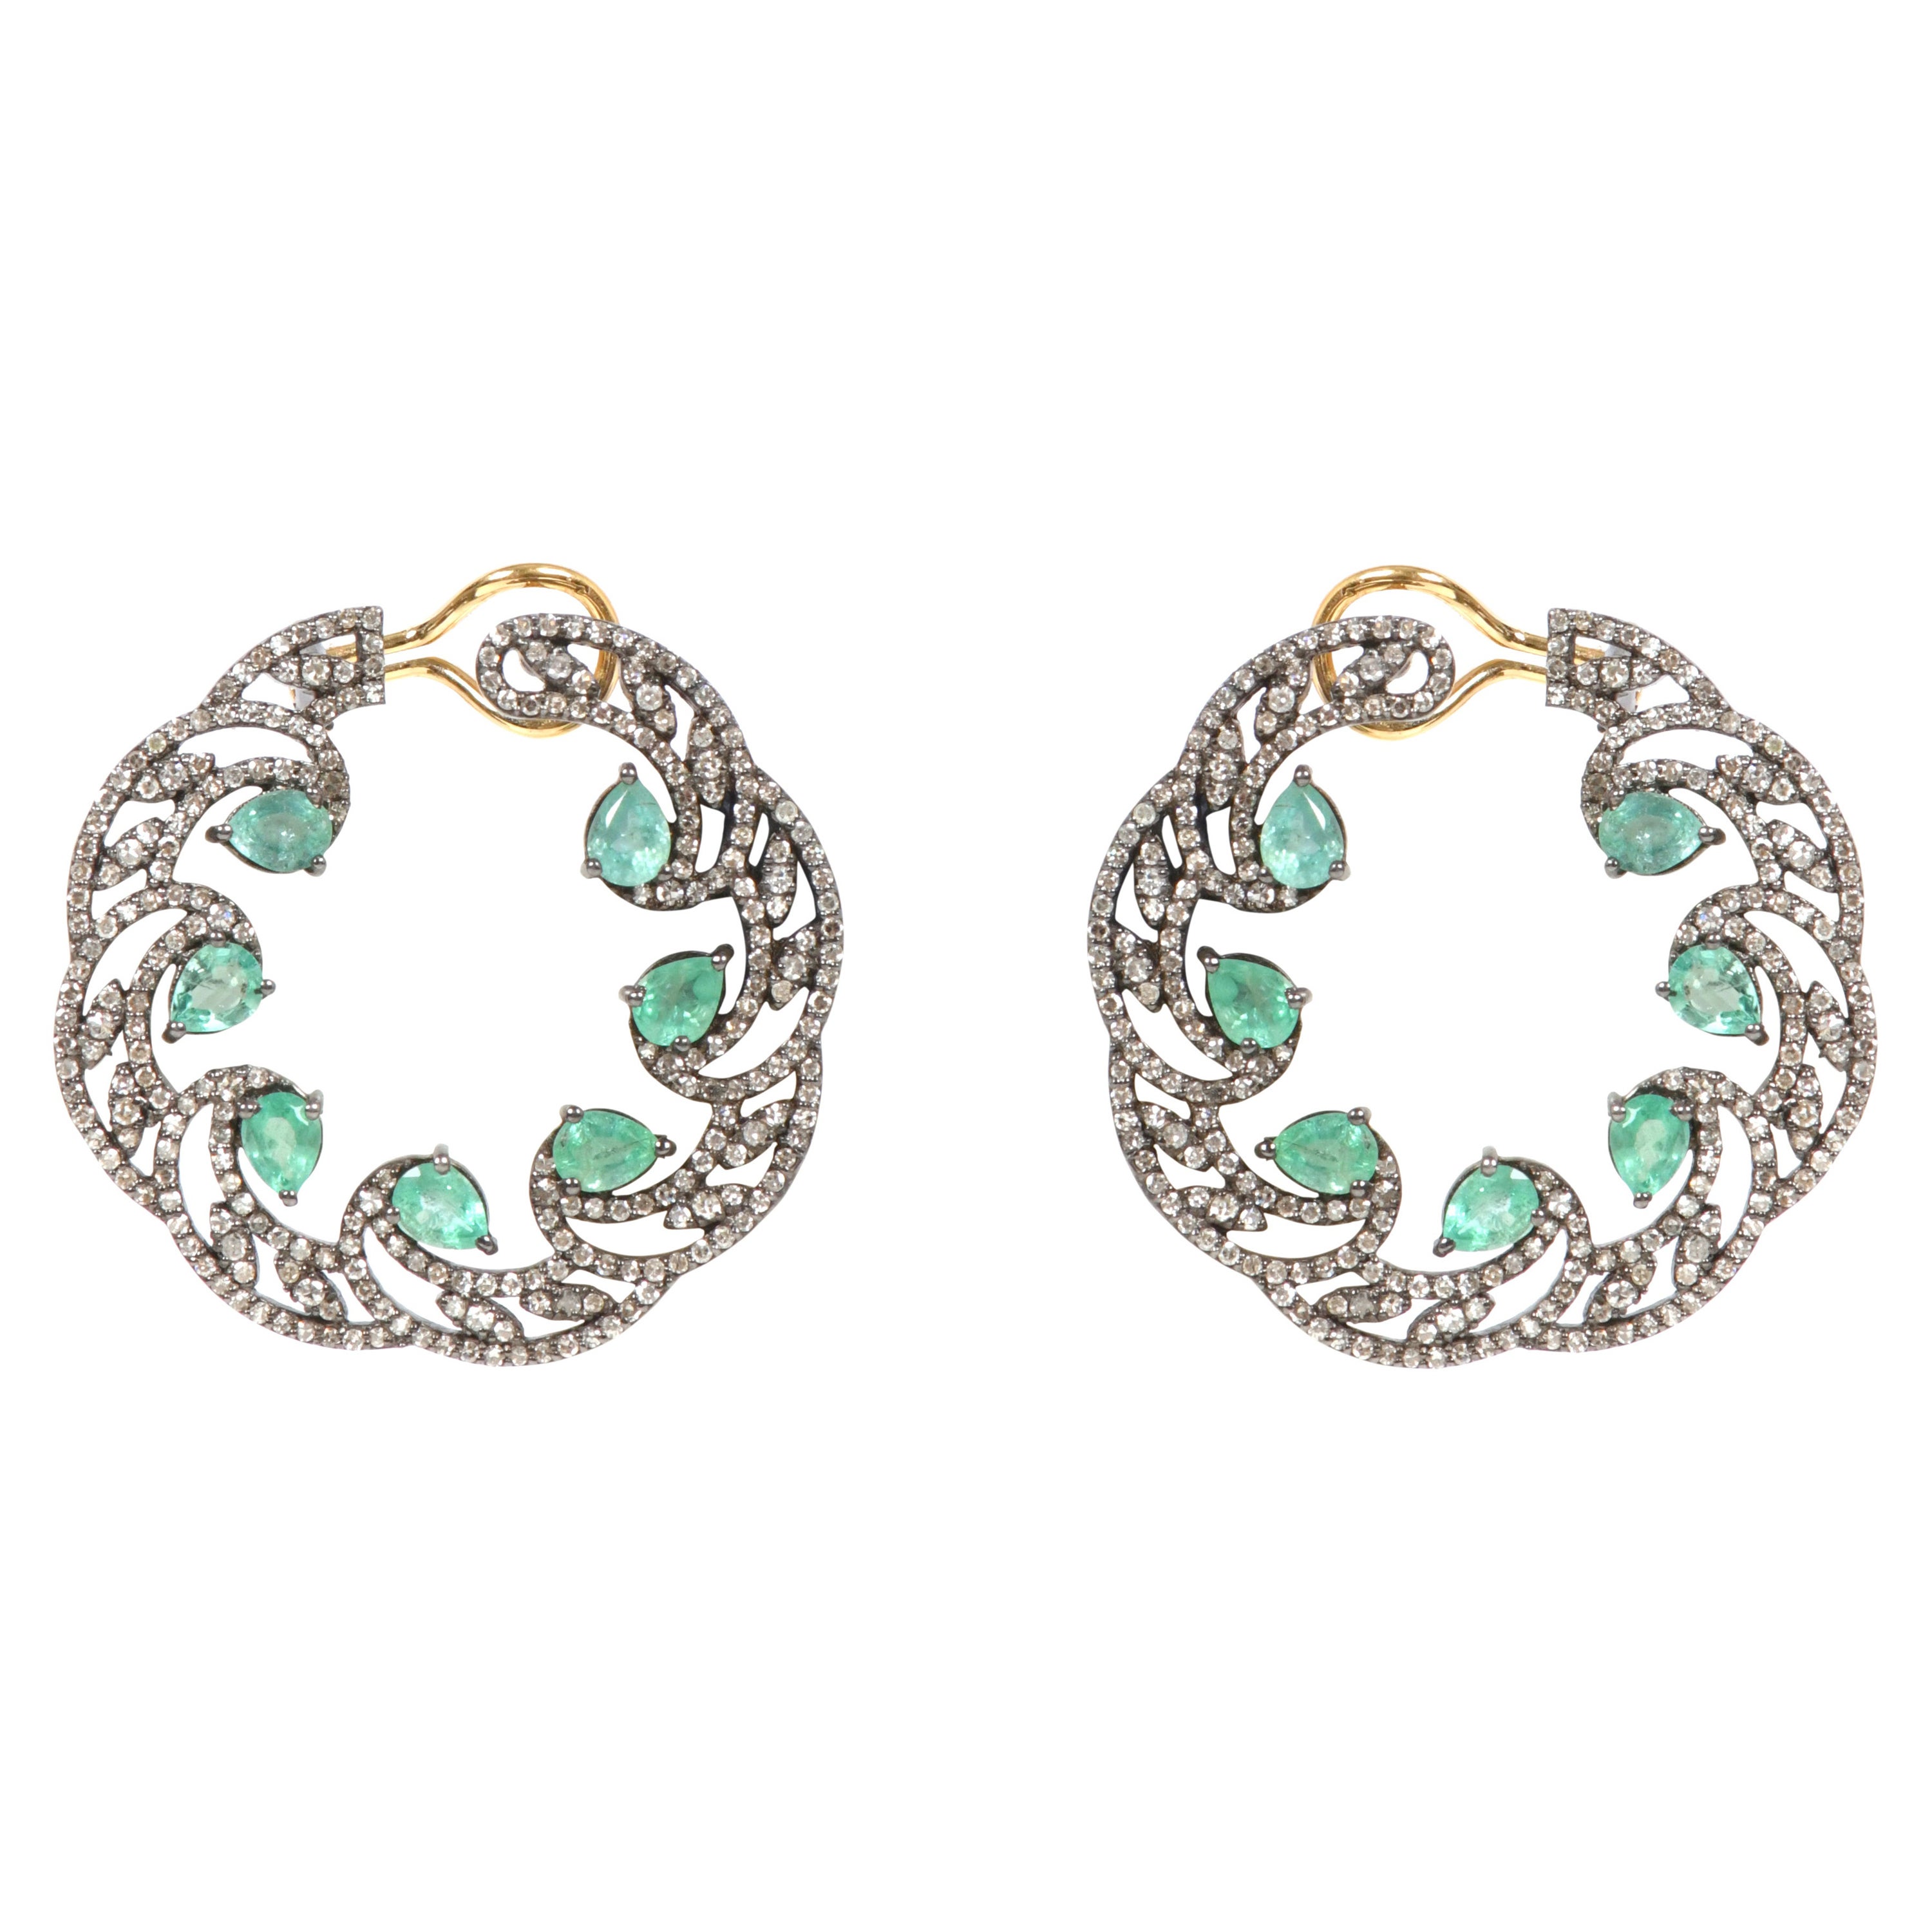 5.96 Carat Emerald and Diamond Modulation Hoop Earrings in Art-Deco Style For Sale